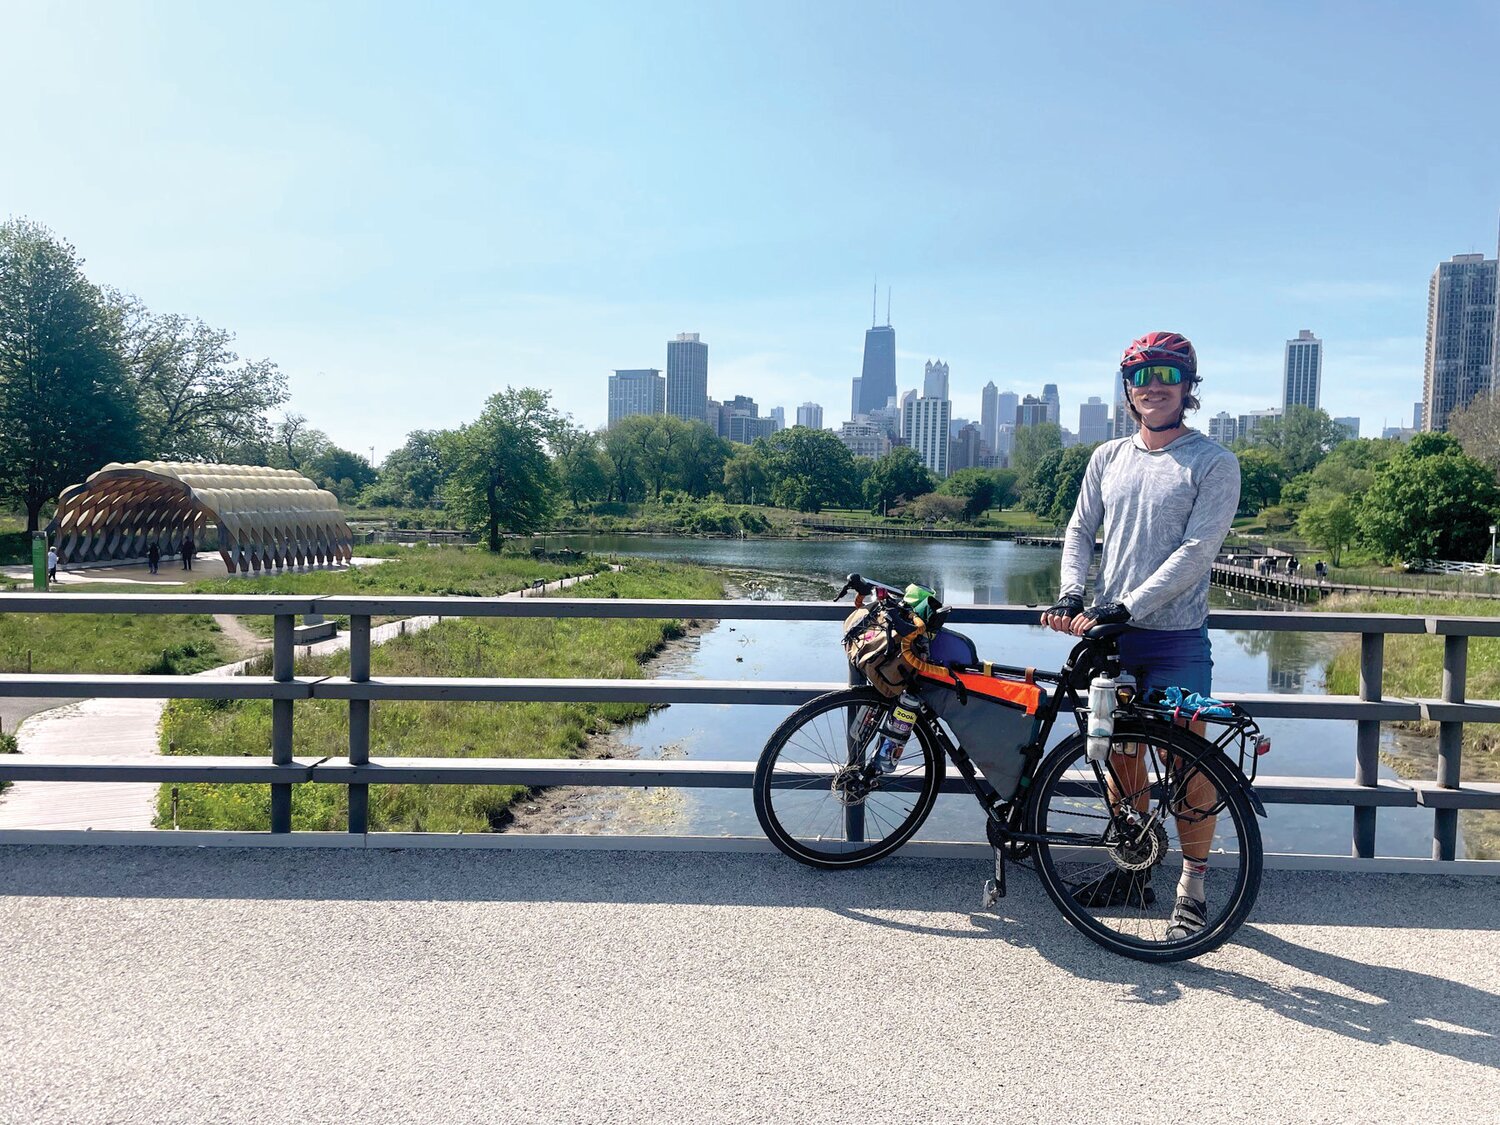 Yardley native Spencer McCullough, framed by the Chicago skyline, is on a bicycling journey to all 51 national parks in the lower 48 states.